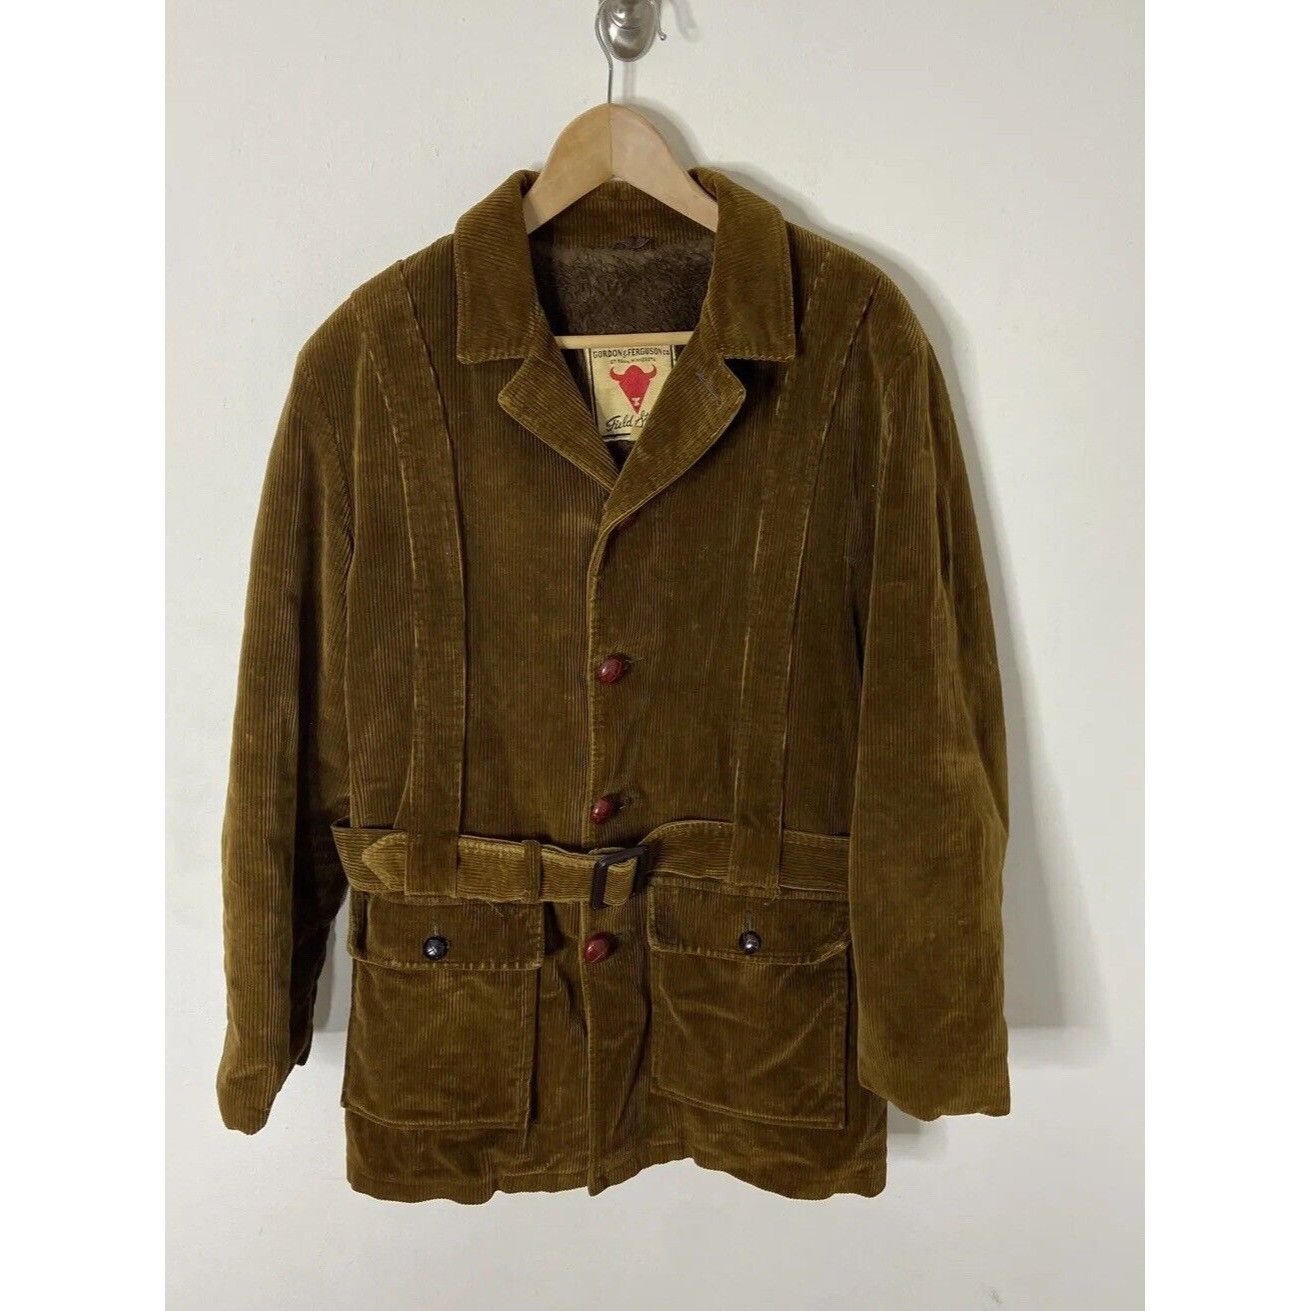 Field And Stream Vintage Field and Stream Men 40 S/M Corduroy Hunting Coat Size US M / EU 48-50 / 2 - 1 Preview